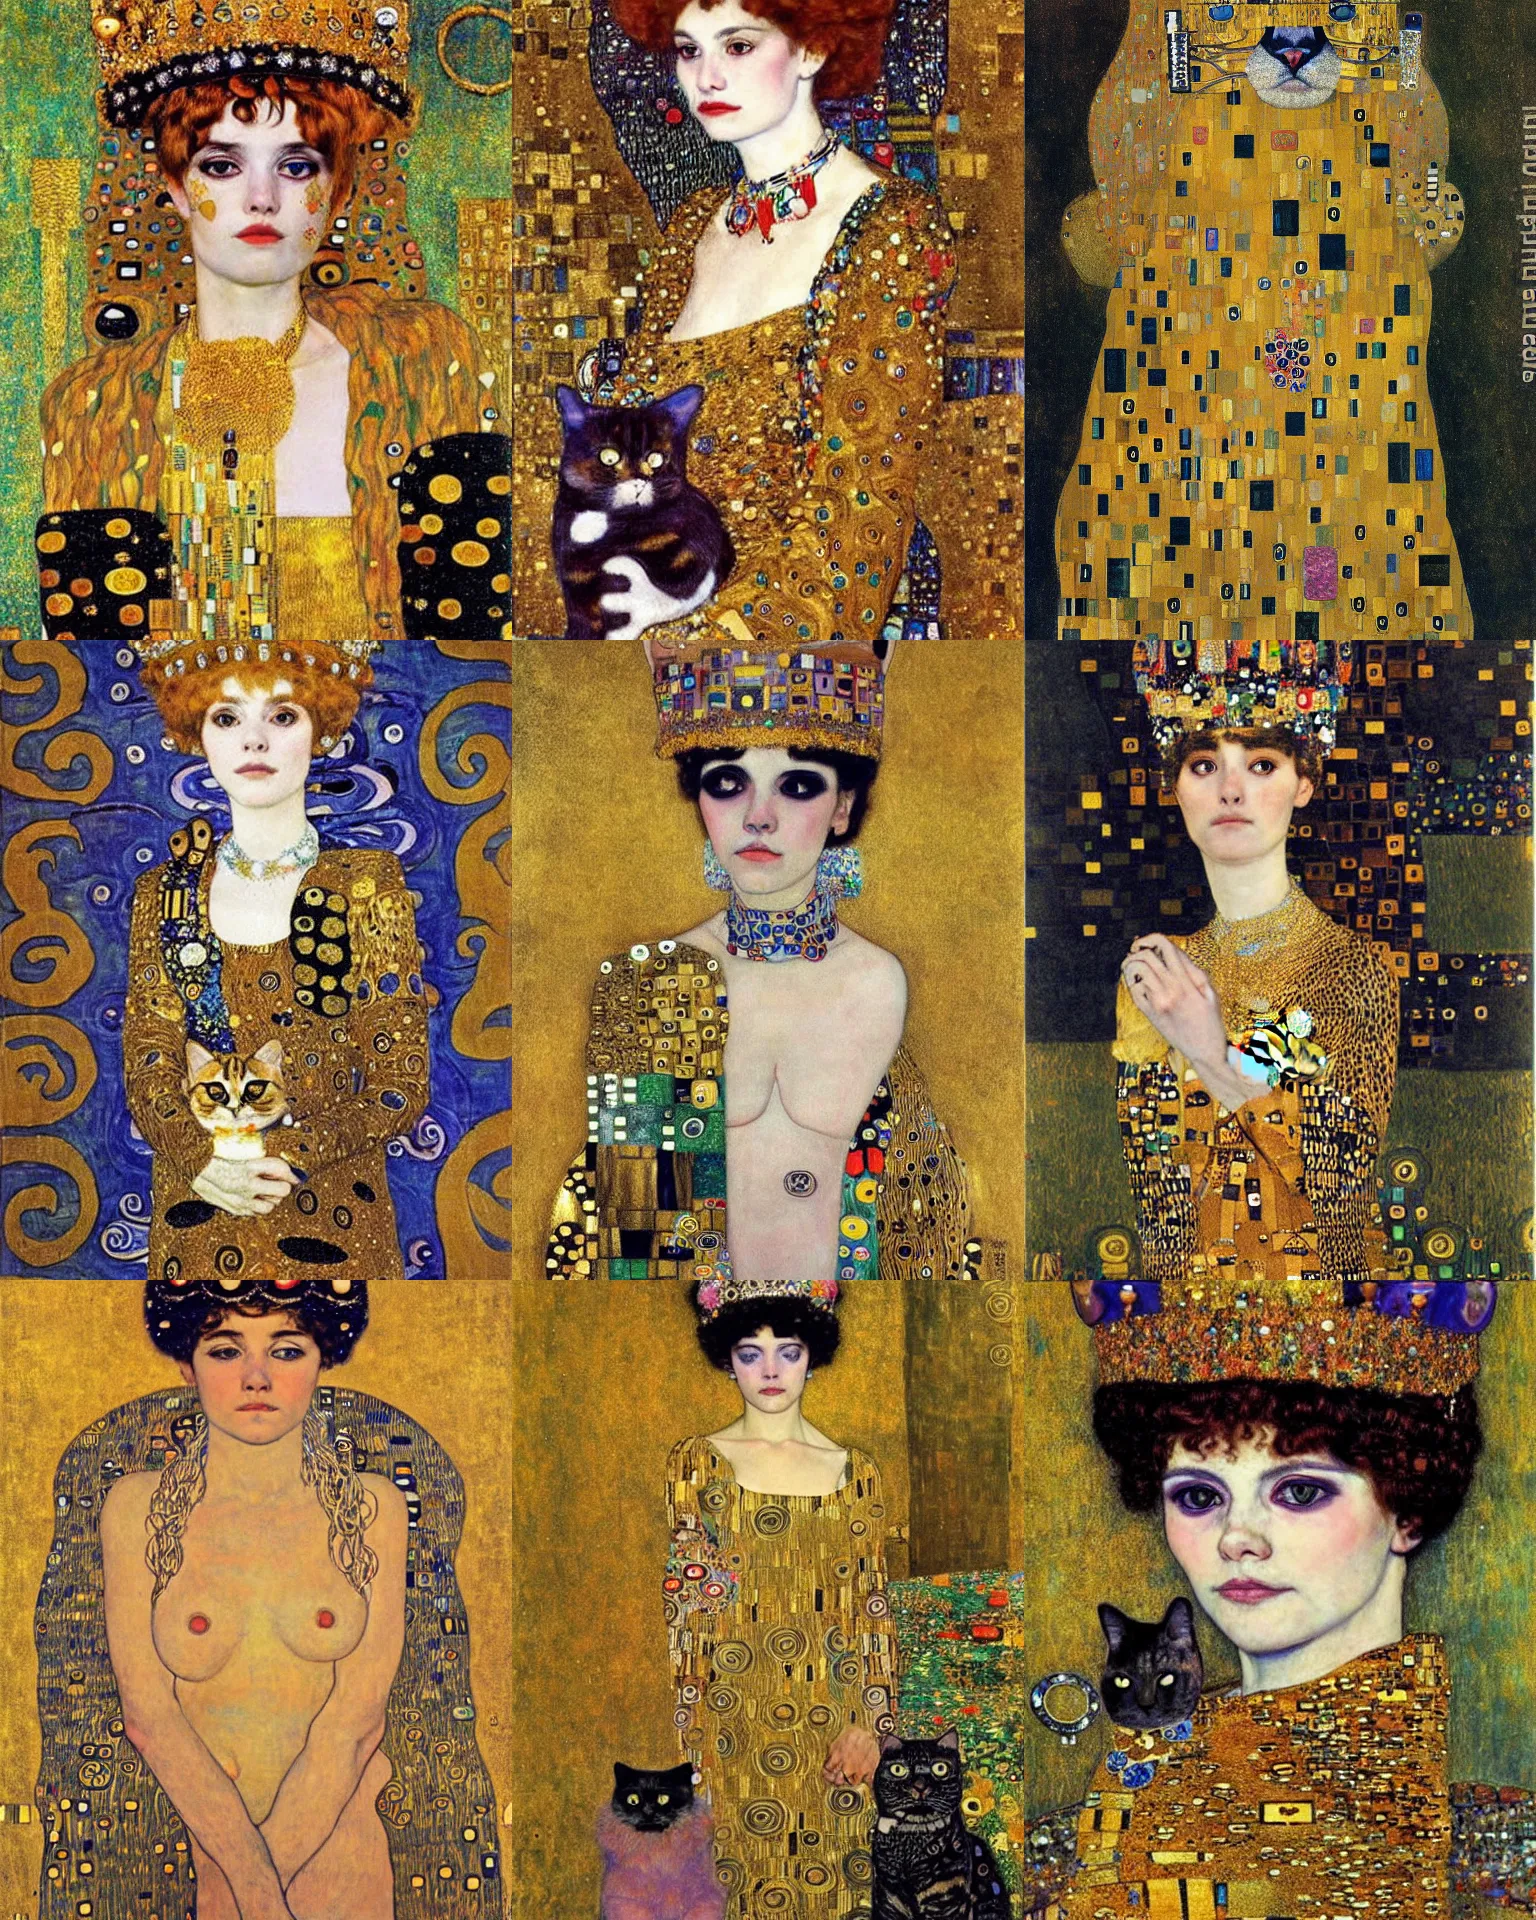 Prompt: a beautiful portrait of a humanoid cat wearing jewels and crown by Gustav Klimt and Carlos Schwabe